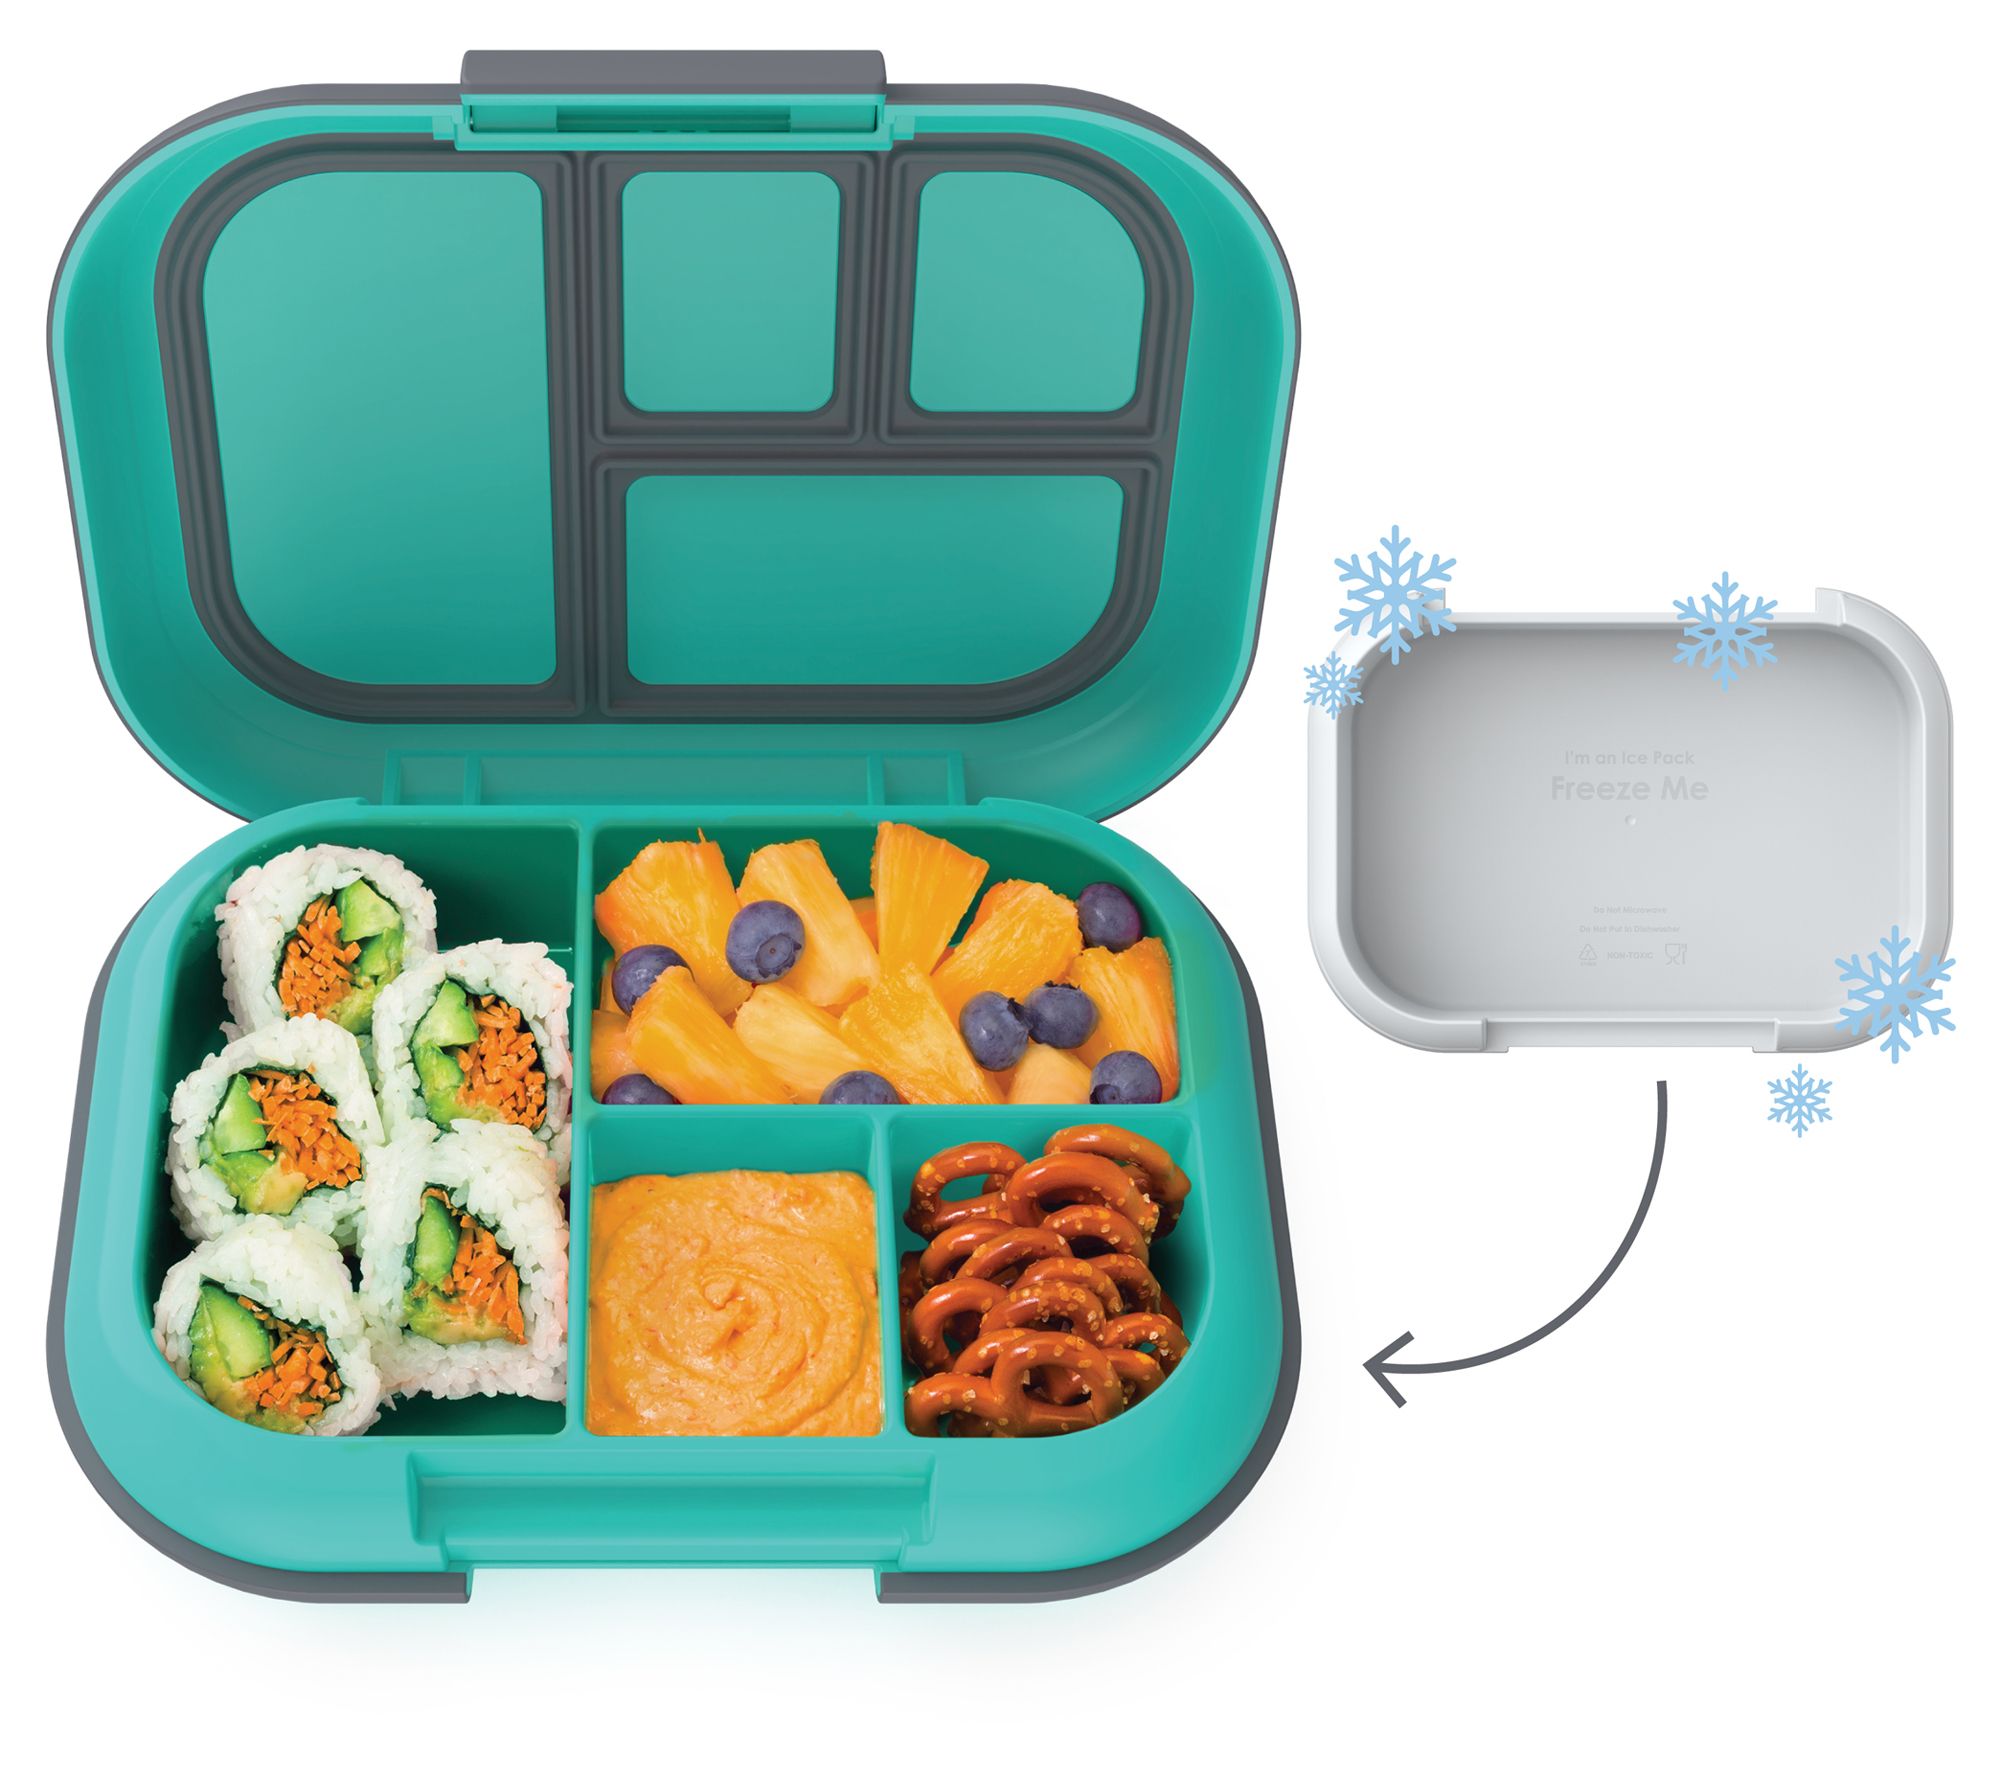 Blue, 3 Layer Leak-Proof Bento Lunch Box for Kids and Adults 3-in-1 Compartment Activave Bento Box Lunch Box